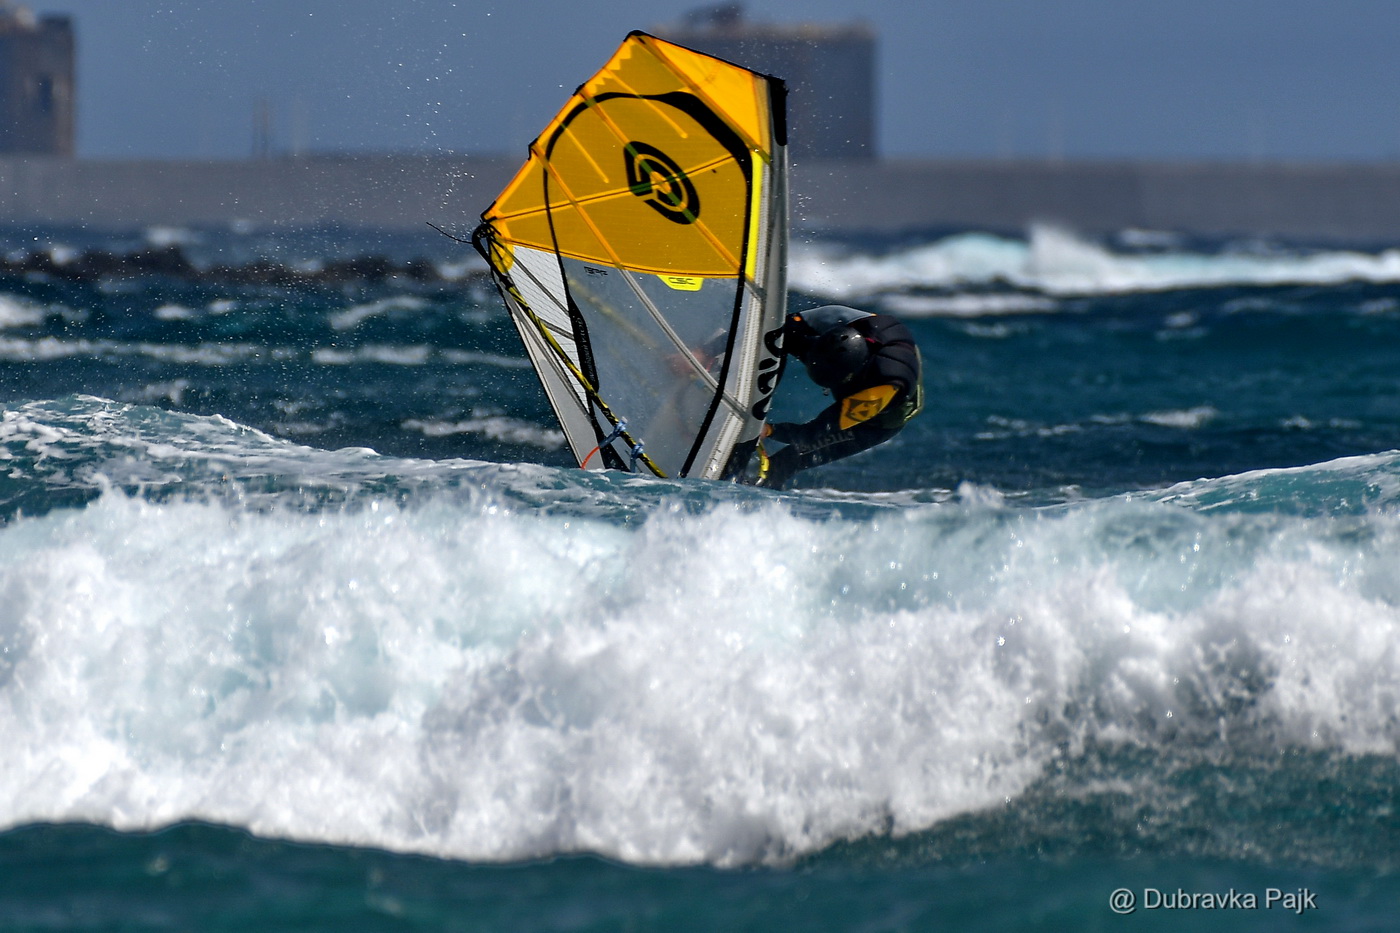 A deep, deep passion for windsurfing